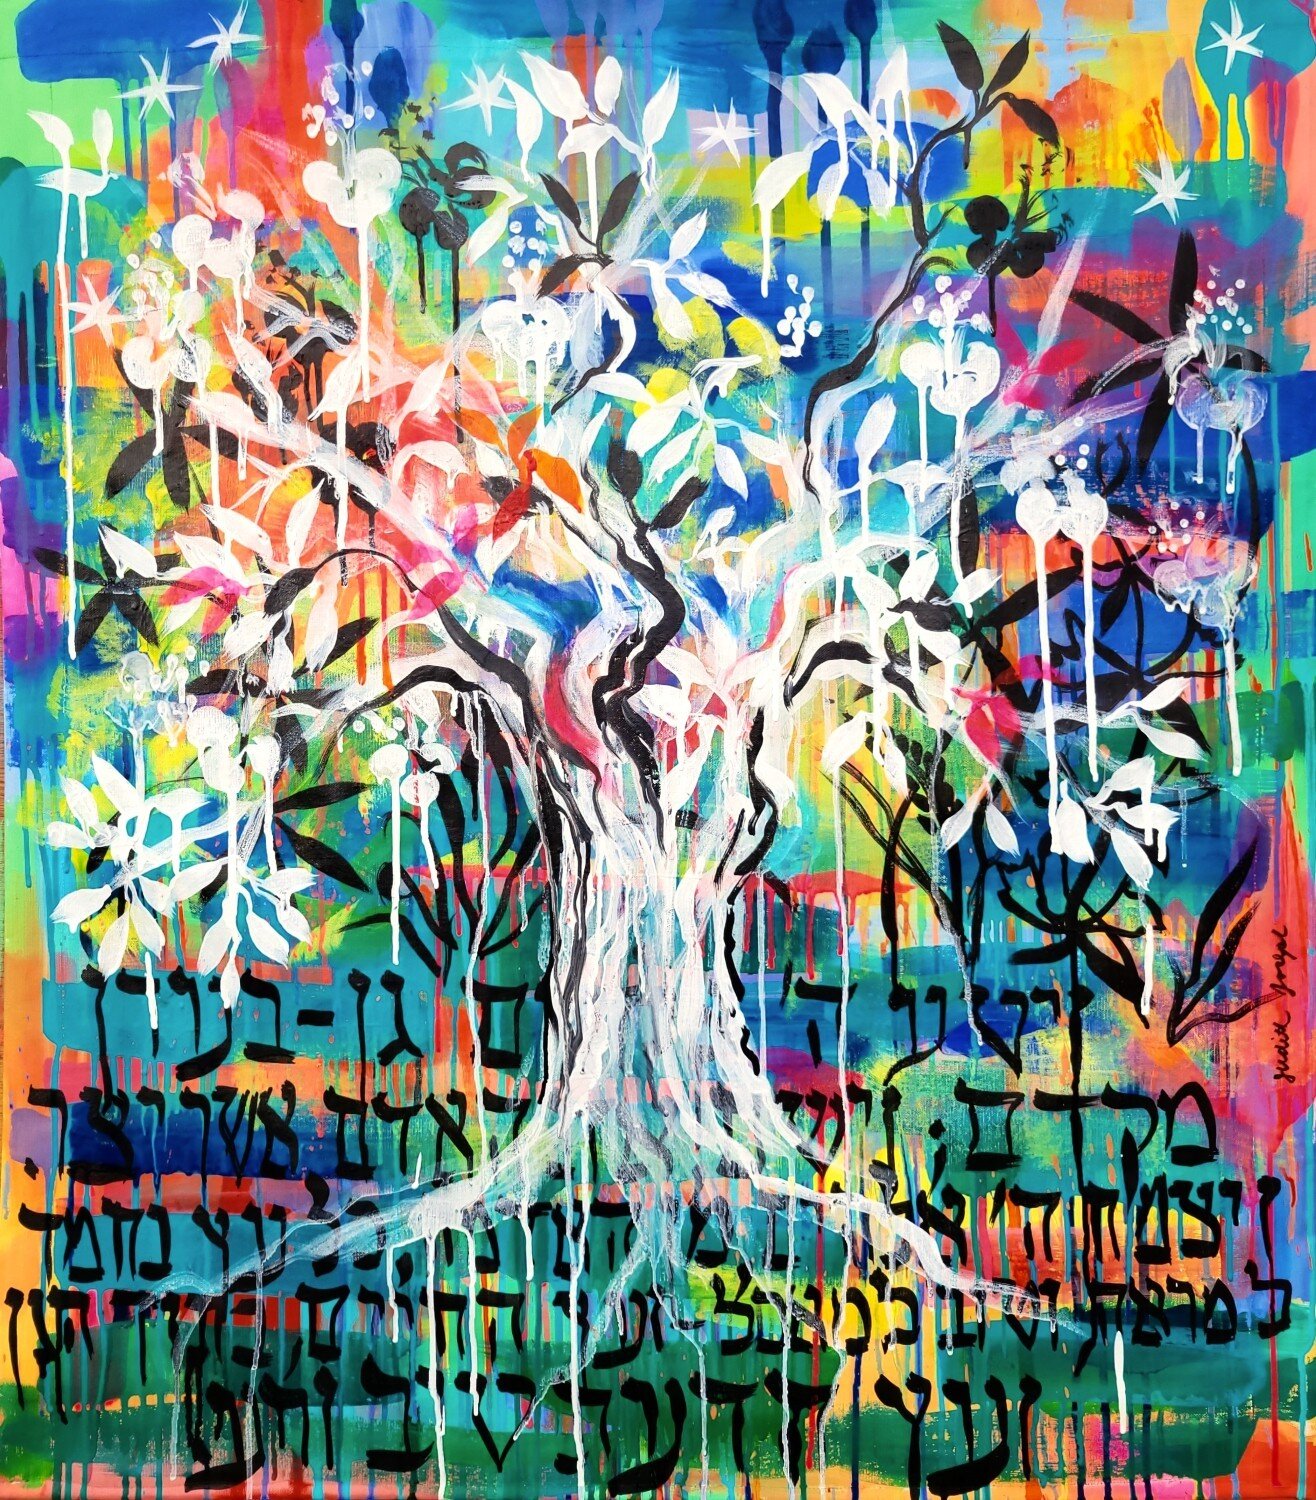 Delighted that my &quot;First Tree&quot; painting, acrylic, 39&quot; x 39&quot;, is included in &quot;Genesis,&quot; an Interfaith and Intercultural Art Exhibition at the Interchurch Center in New York, May- July, 2023. Thanks to curators Joel Silver